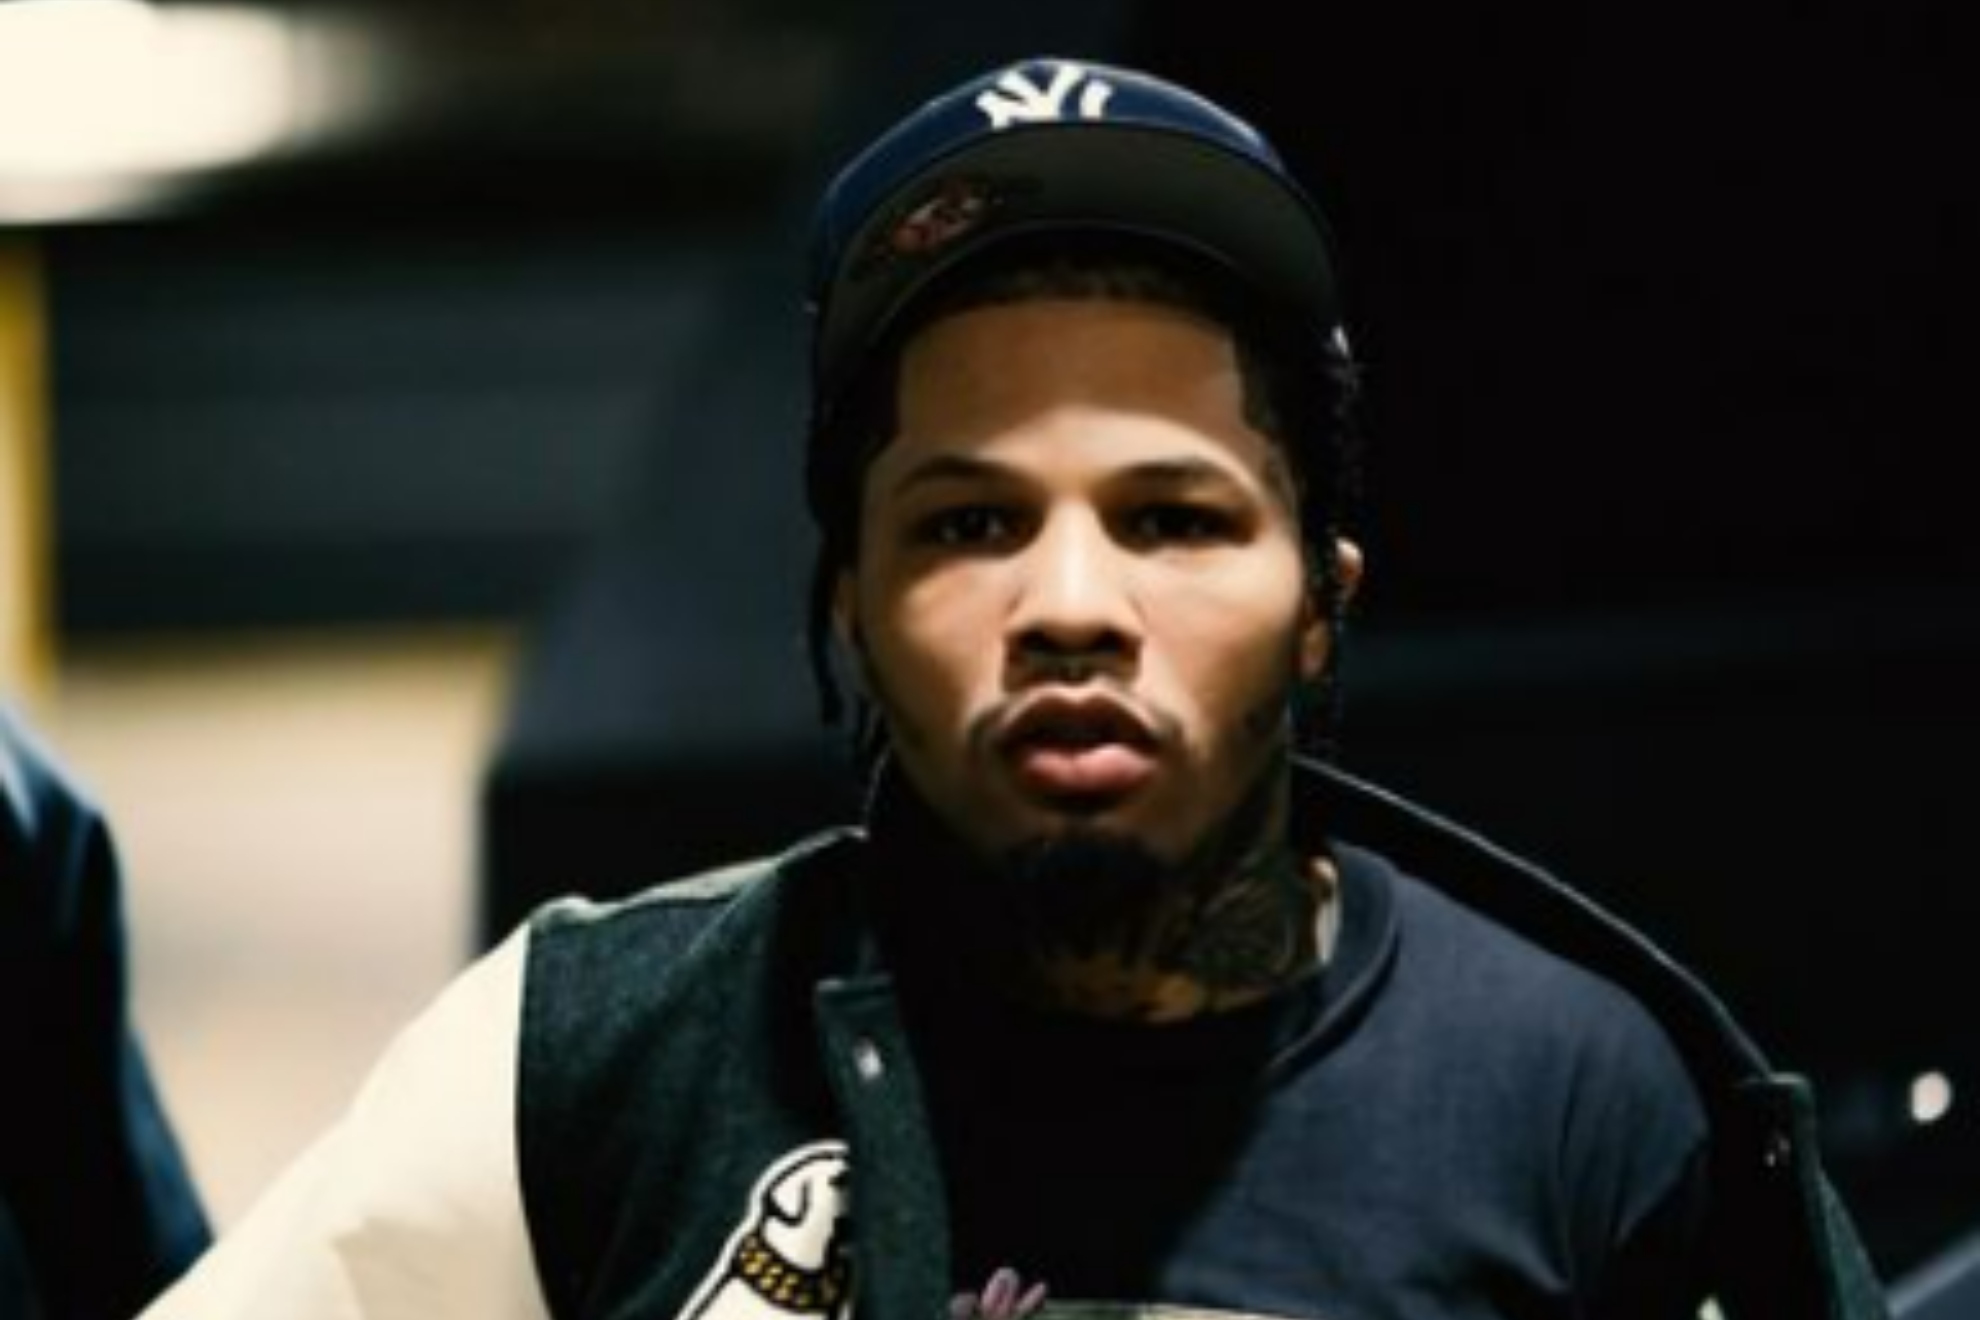 Gervonta Davis reacts to the Ryan García fight after watching it for the first time